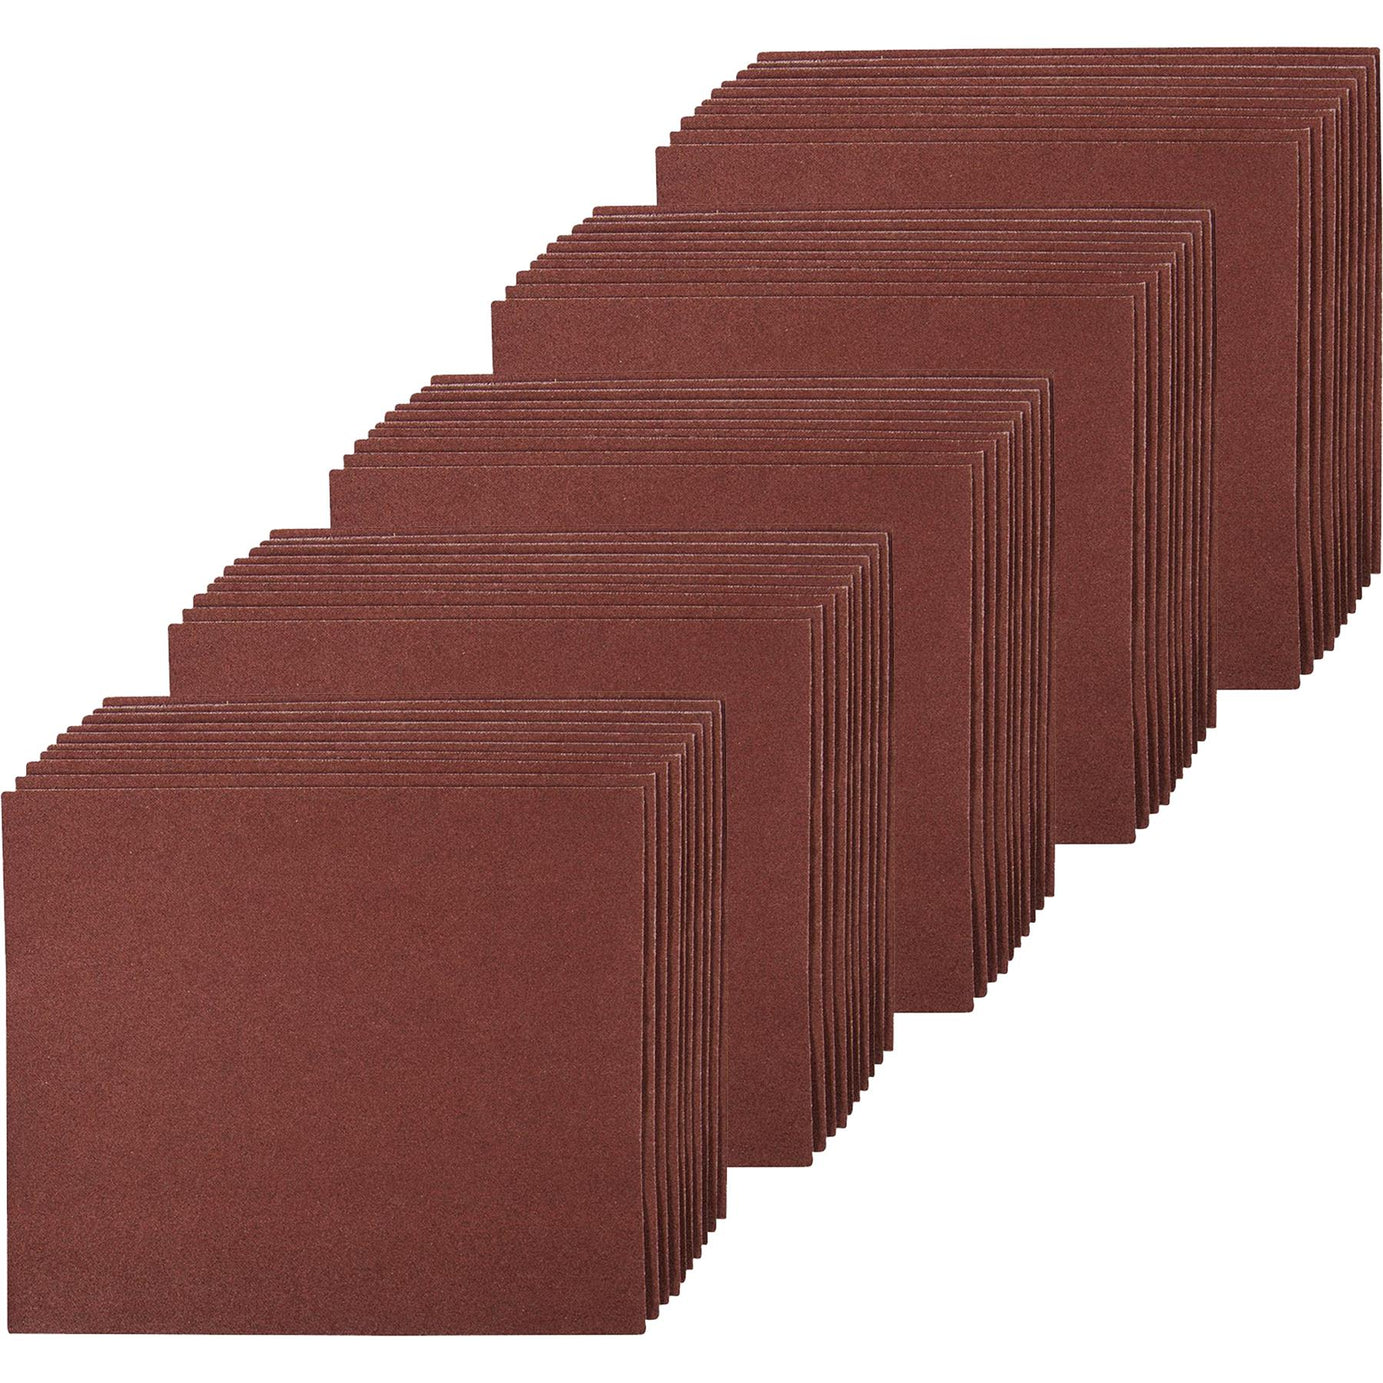 50 Pk Emery Cloth Hand Sanding Sheets 36 60 80 120 180 Grit Metal & Rust Removal